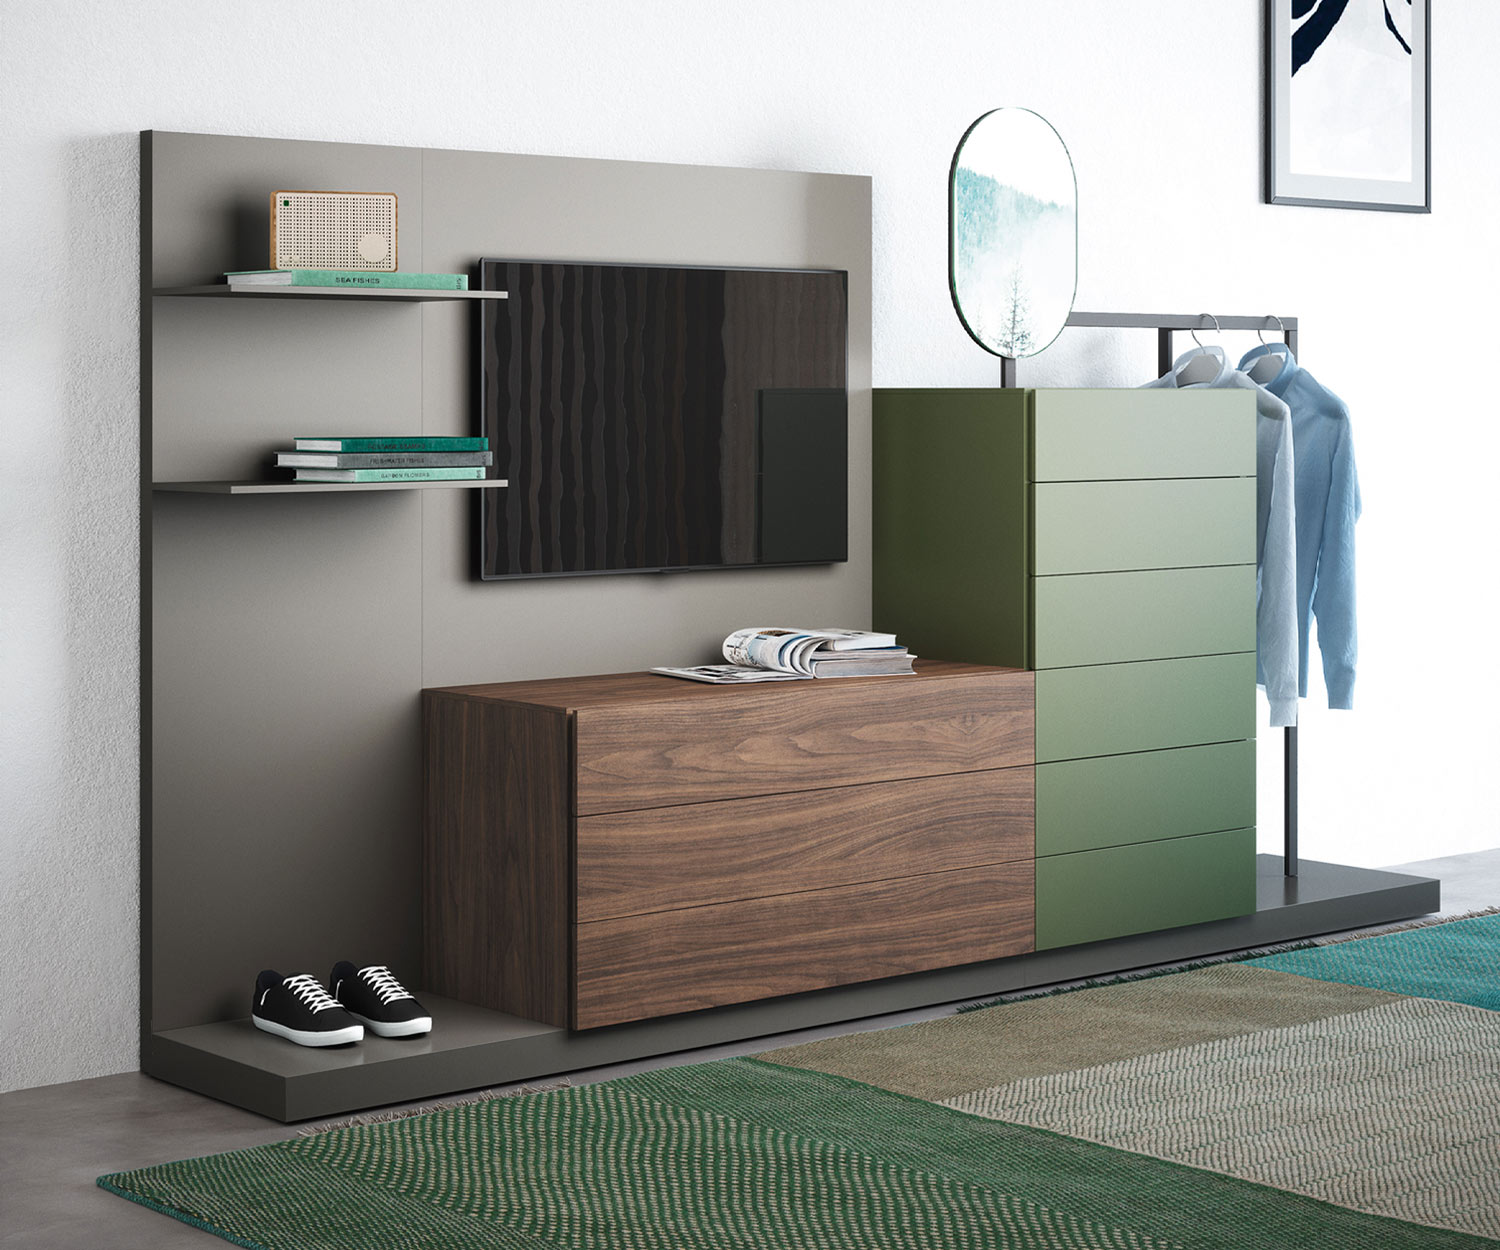 Exclusive Easy 9 design chest of drawers with wardrobe and TV panel from Novamobili